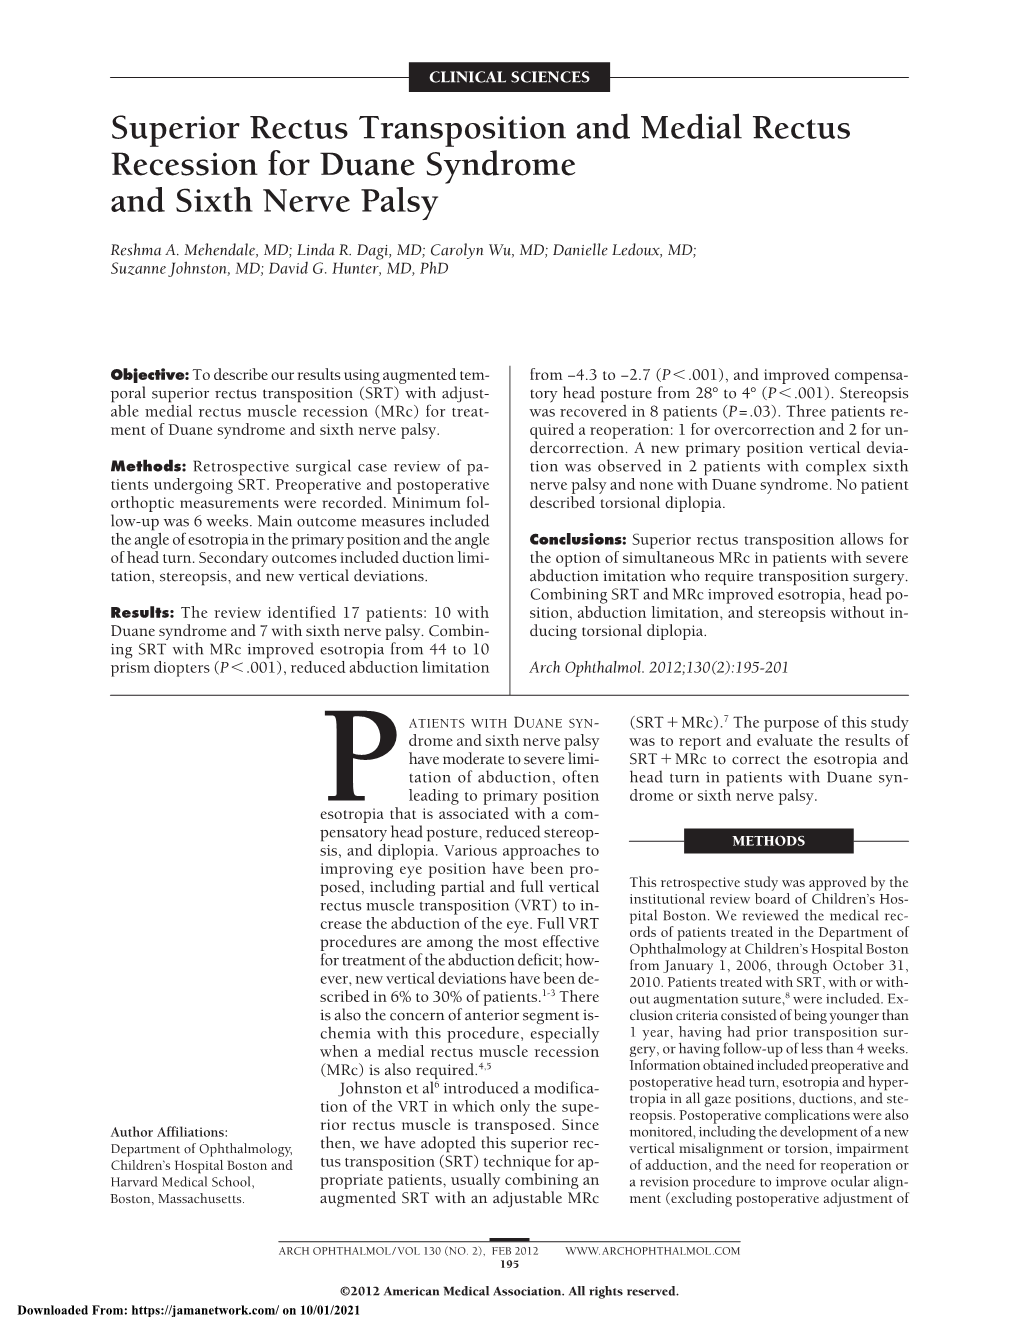 Superior Rectus Transposition and Medial Rectus Recession for Duane Syndrome and Sixth Nerve Palsy